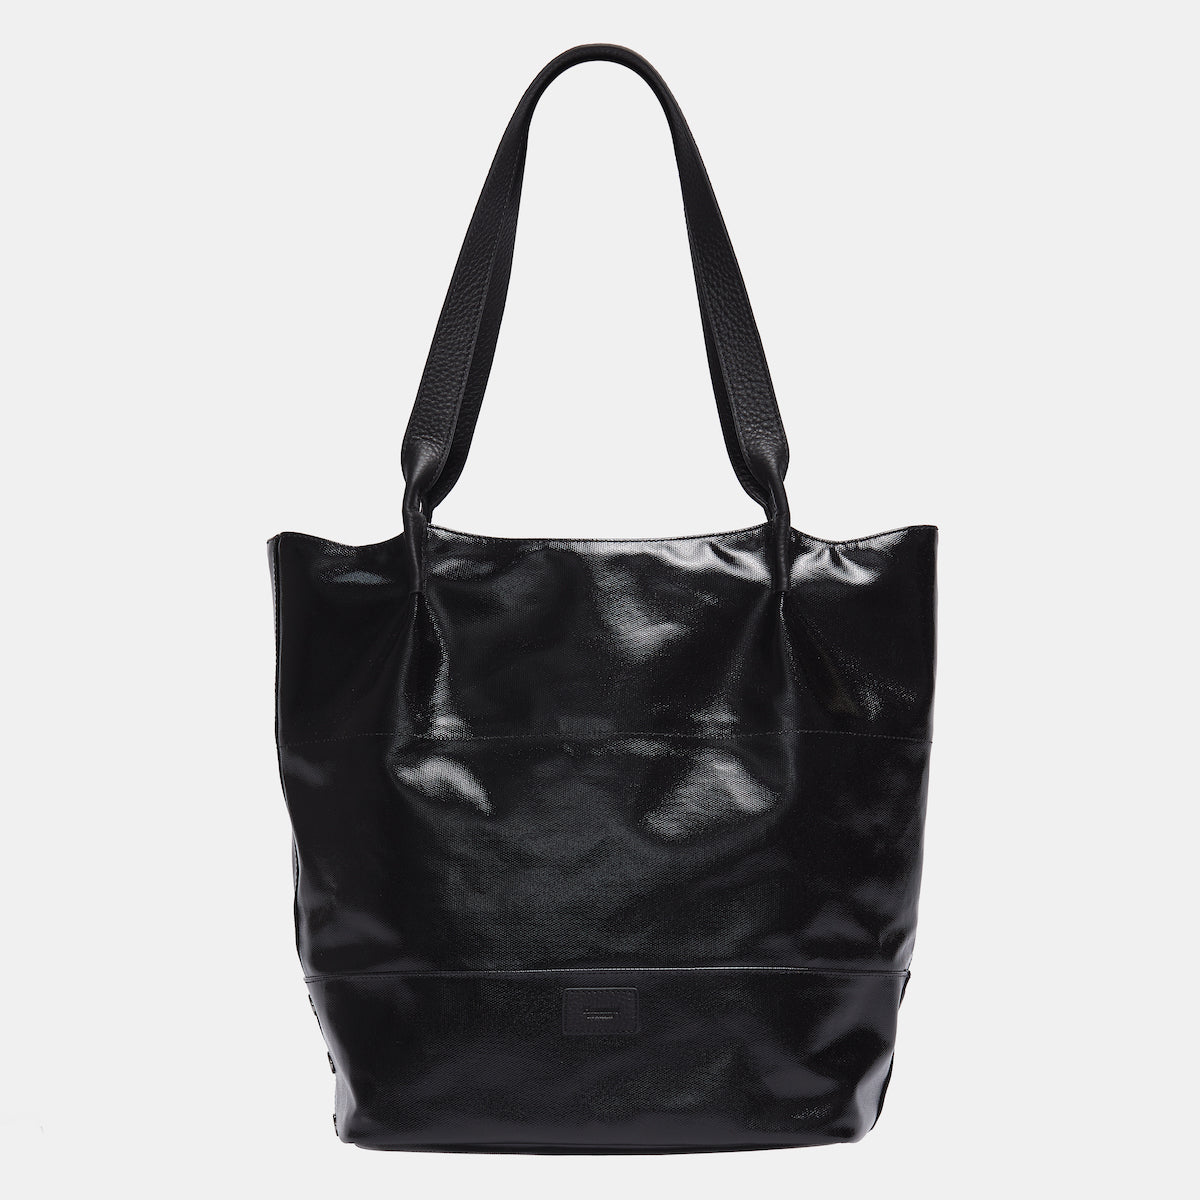 Venice-Beach-Tote-Black-Shadow-Light-Front-View